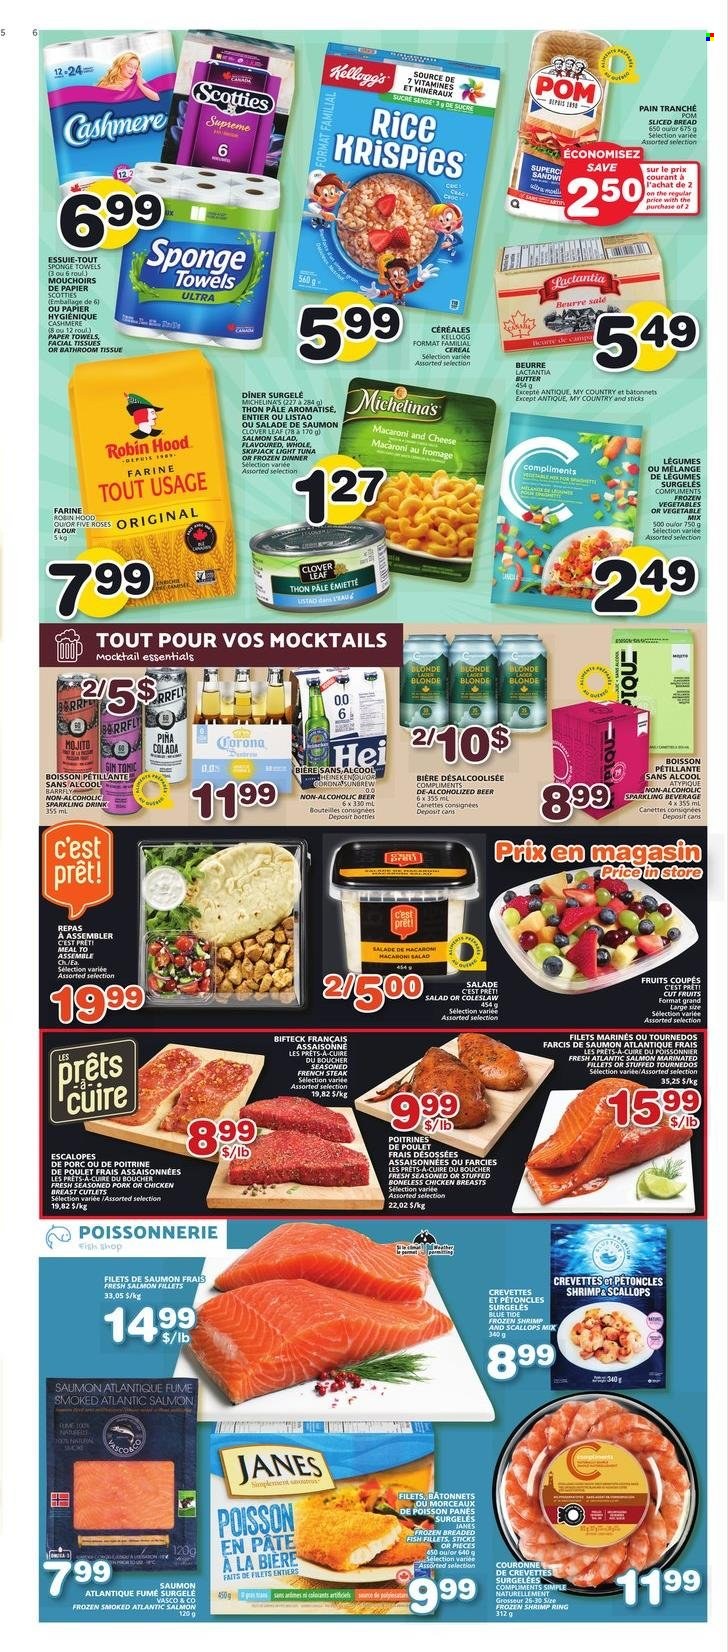 thumbnail - Les Marchés Tradition Flyer - February 02, 2023 - February 08, 2023 - Sales products - bread, fish fillets, salmon, salmon fillet, scallops, tuna, fish, shrimps, coleslaw, macaroni & cheese, breaded fish, macaroni salad, Clover, butter, frozen vegetables, Kellogg's, flour, light tuna, cereals, Rice Krispies, tonic, Ron Pelicano, beer, Corona Extra, Lager, chicken, bath tissue, kitchen towels, paper towels, Tide, facial tissues, steak. Page 5.